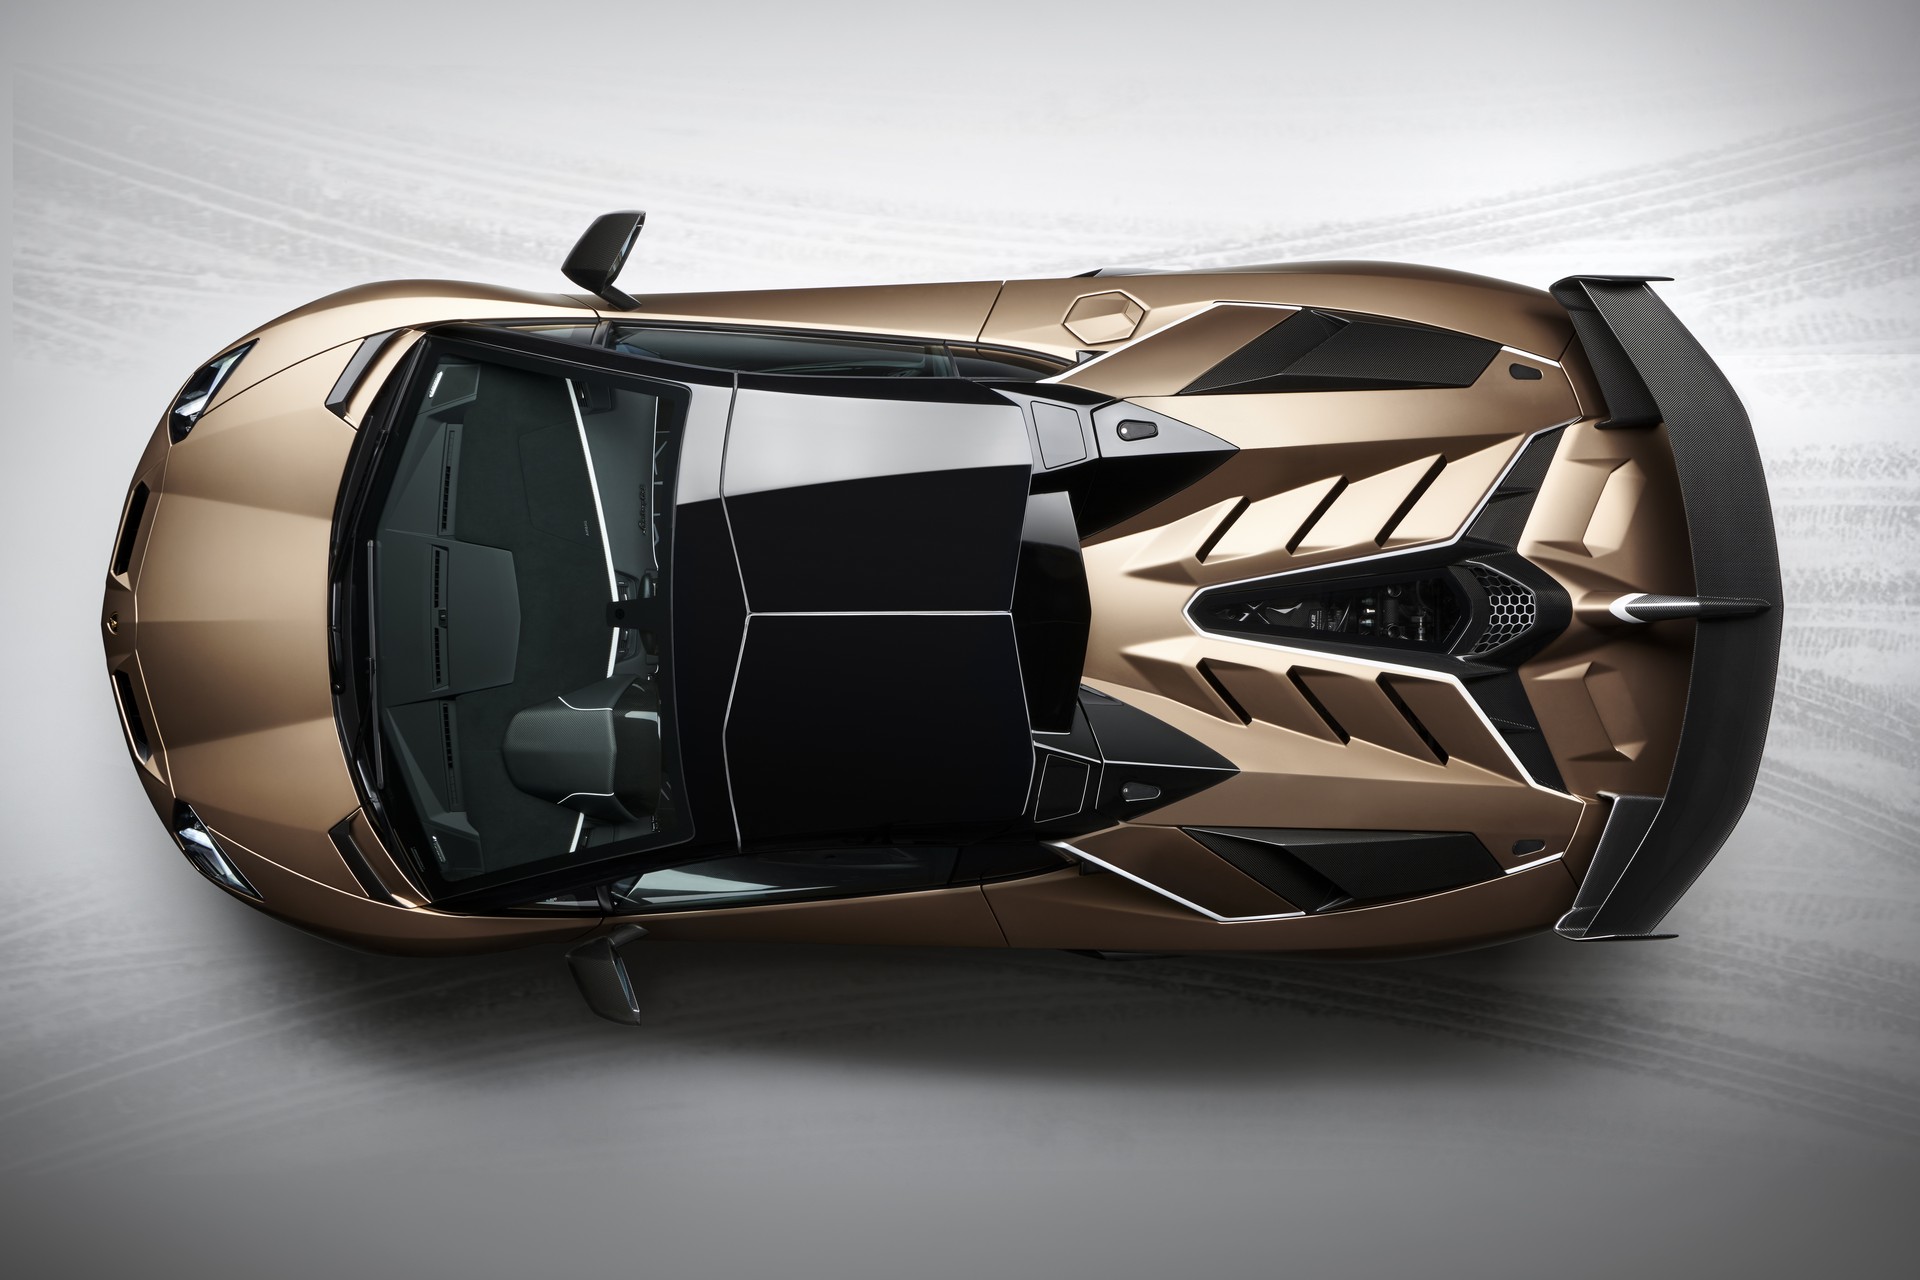 Lamborghini Sian Officially Debuts Tomorrow, But You Can See It Now